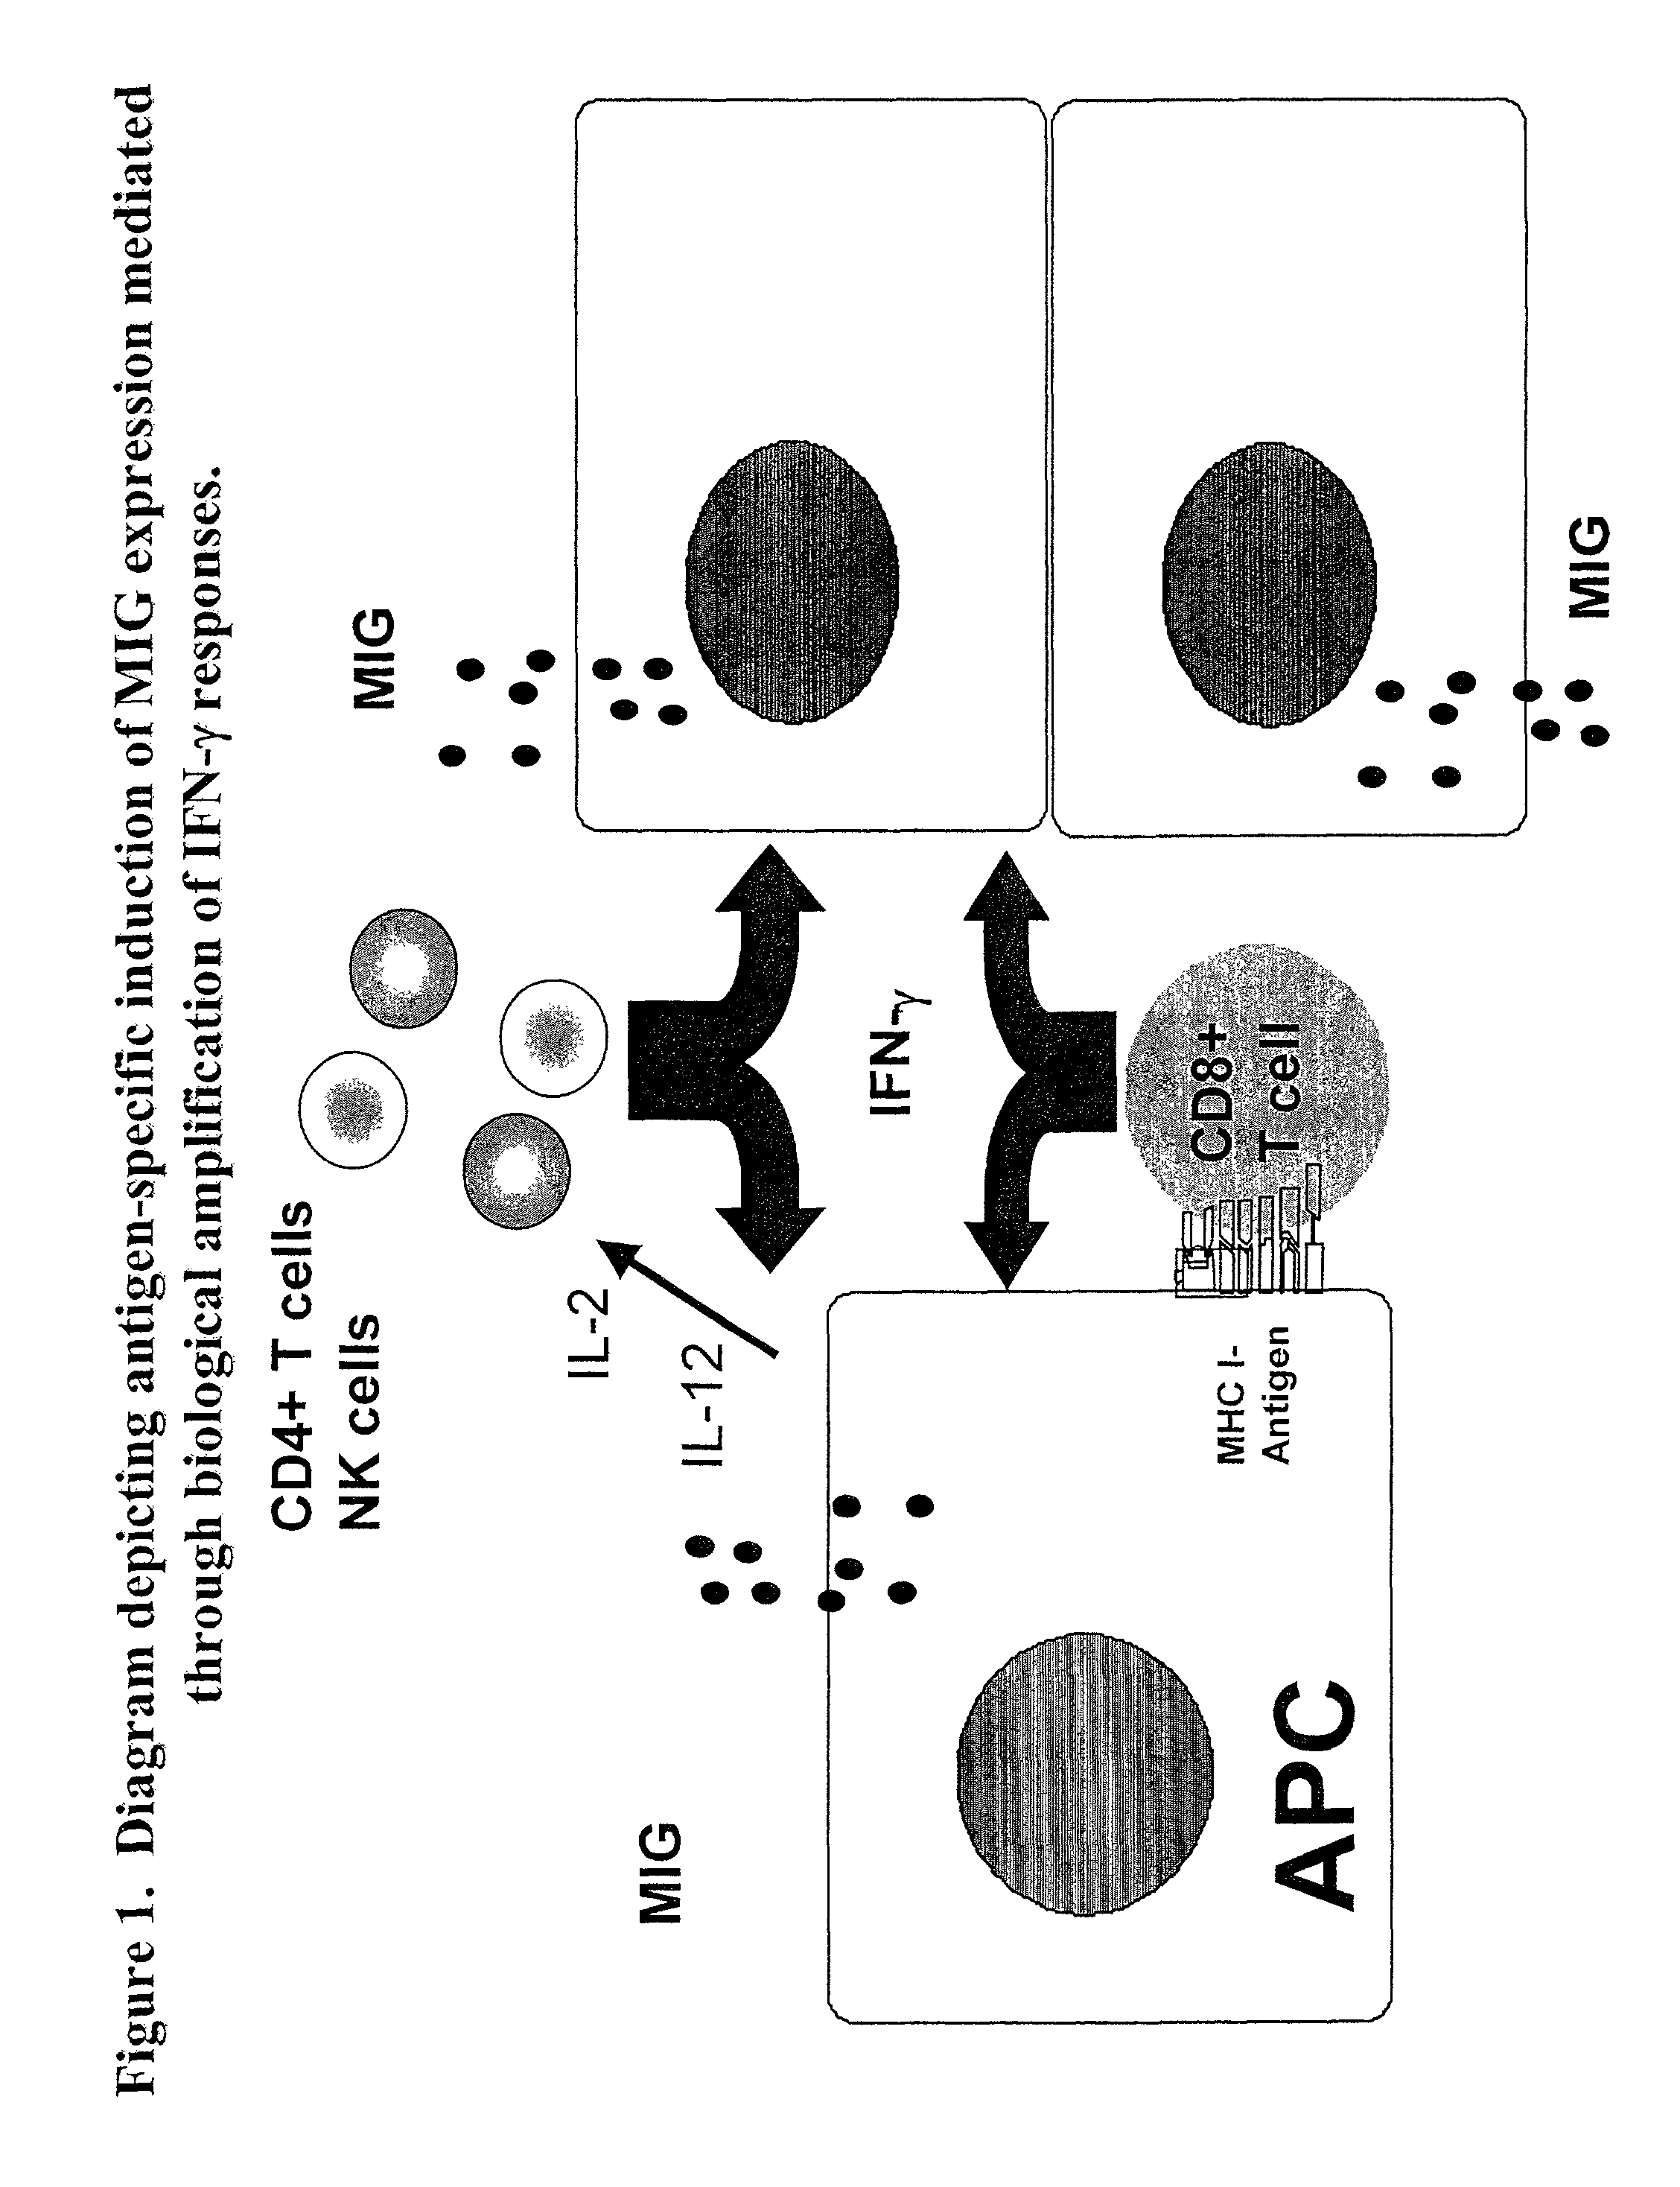 Assay for detecting immune responses involving antigen specific cytokine and/or antigen specific cytokine secreting T-cells